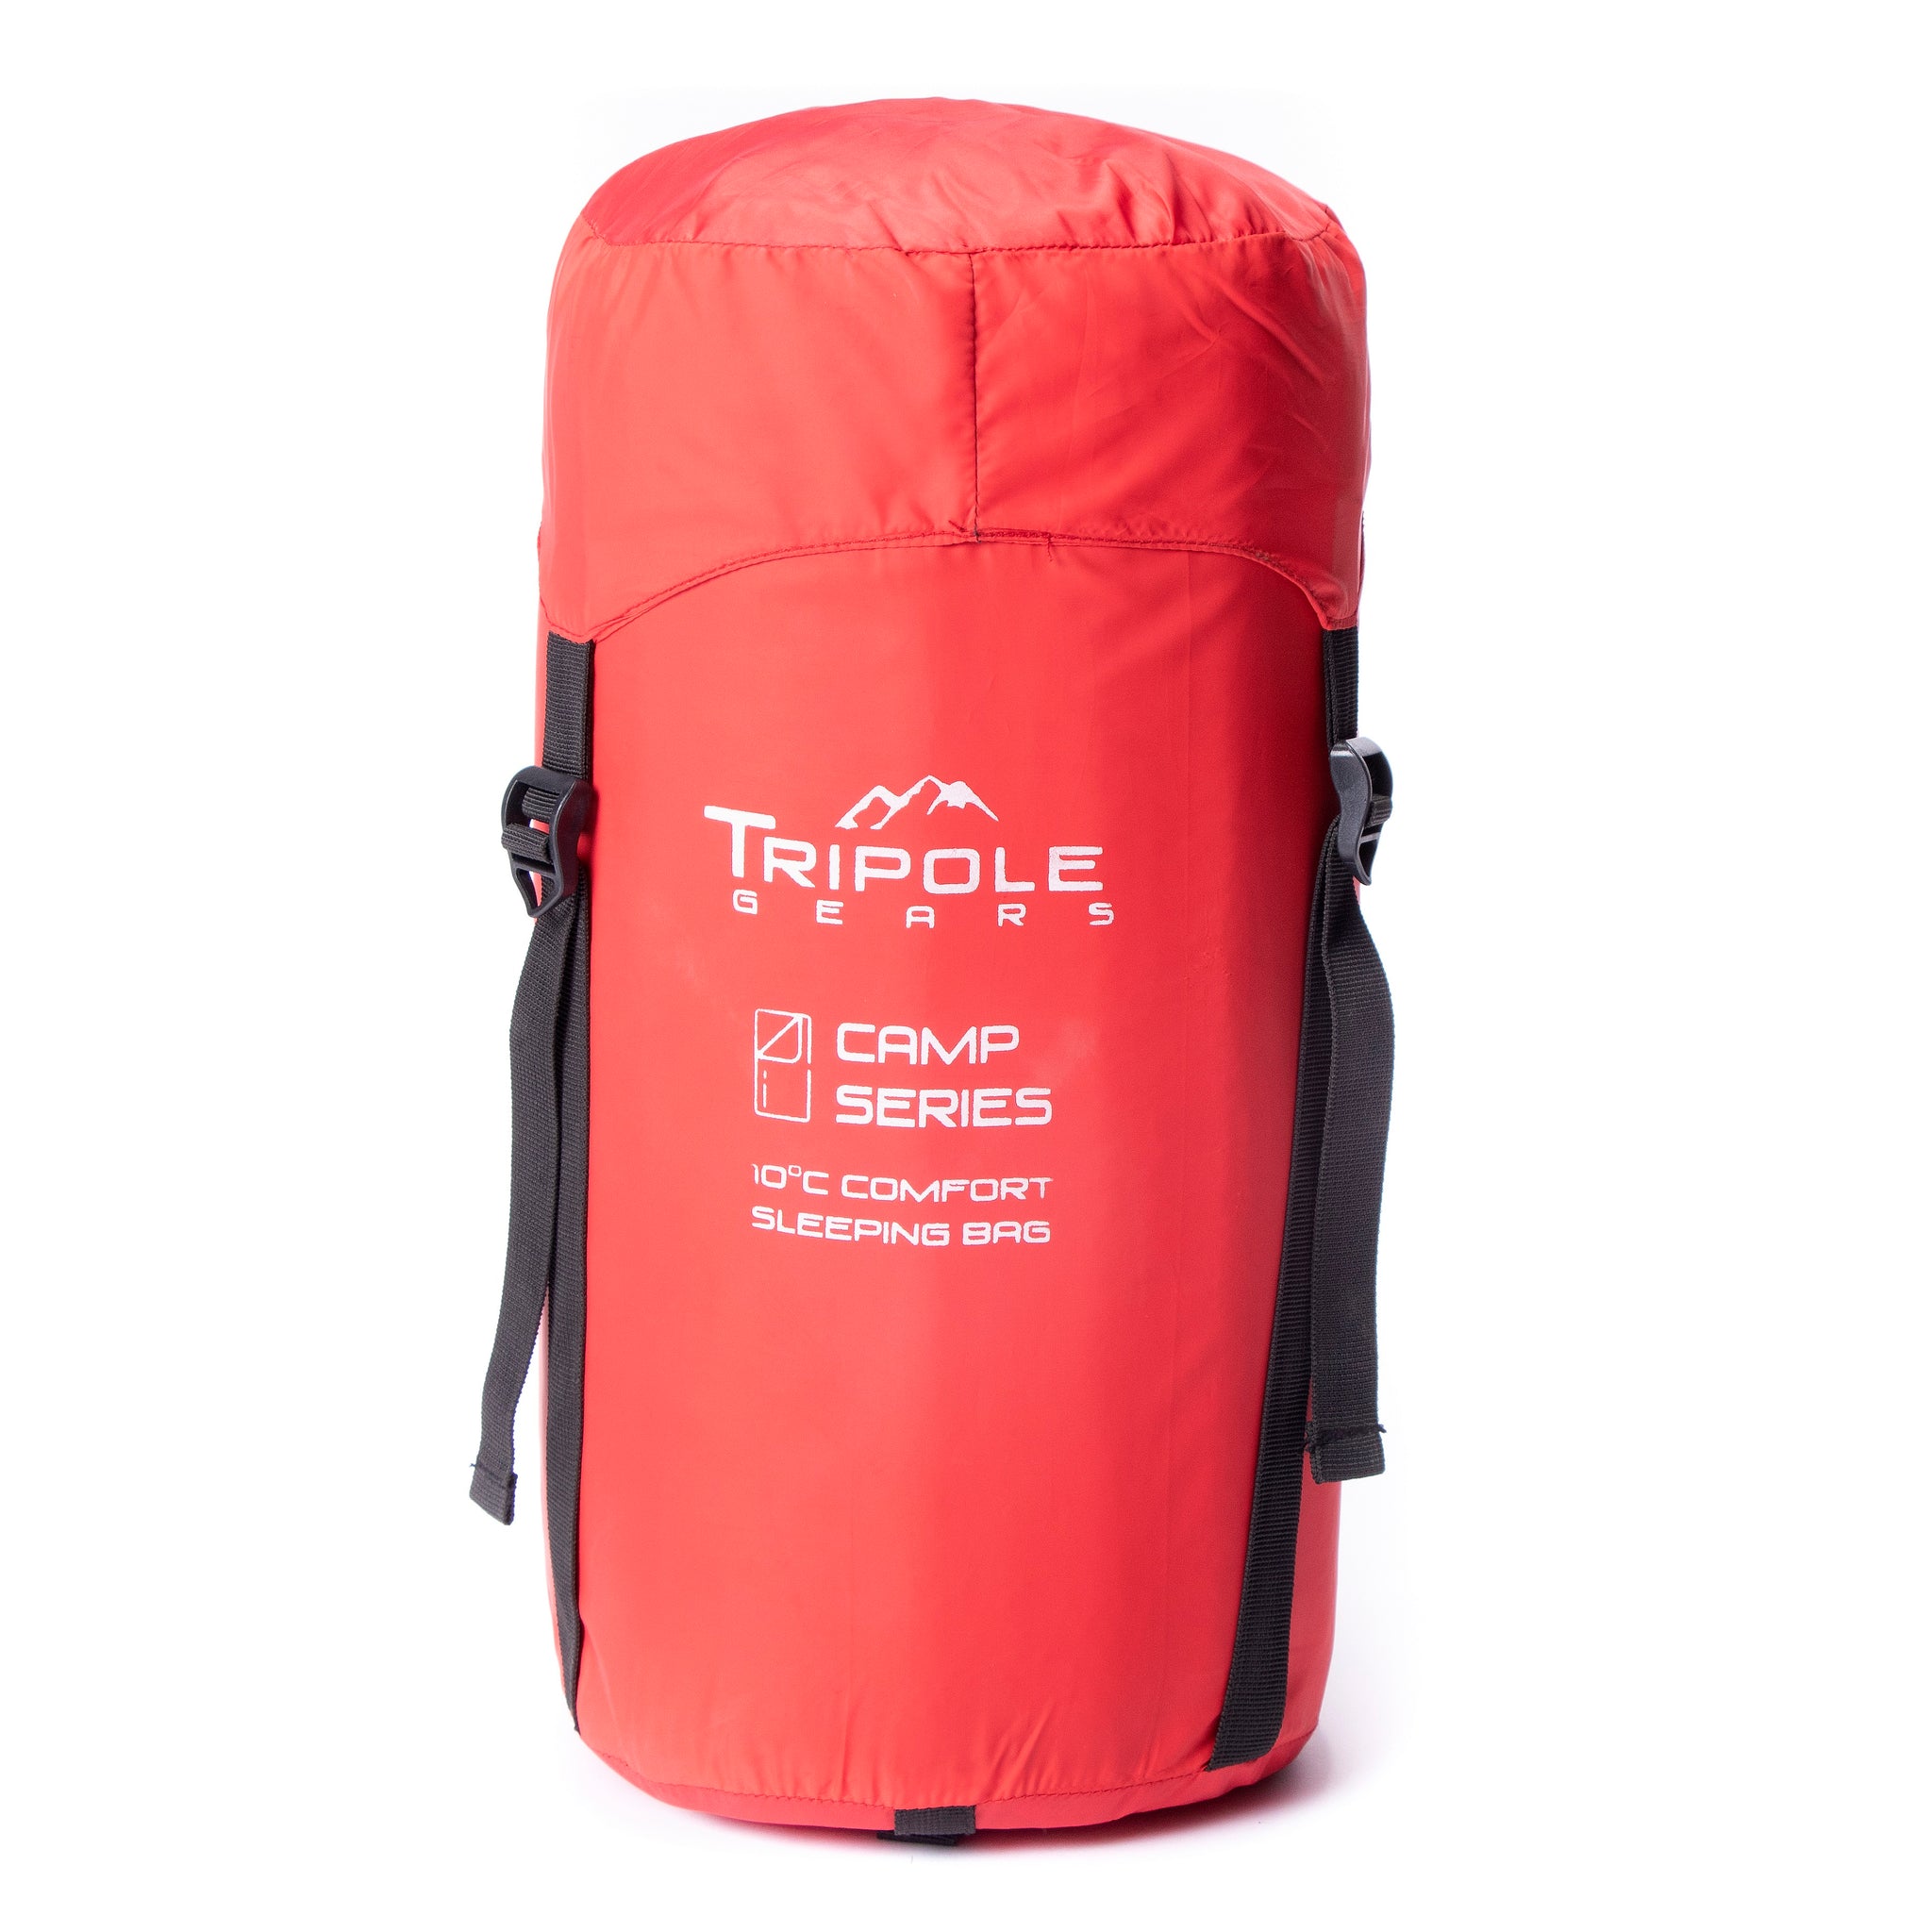 Tripole Camp Series Rectangular Sleeping Bag for Camping and